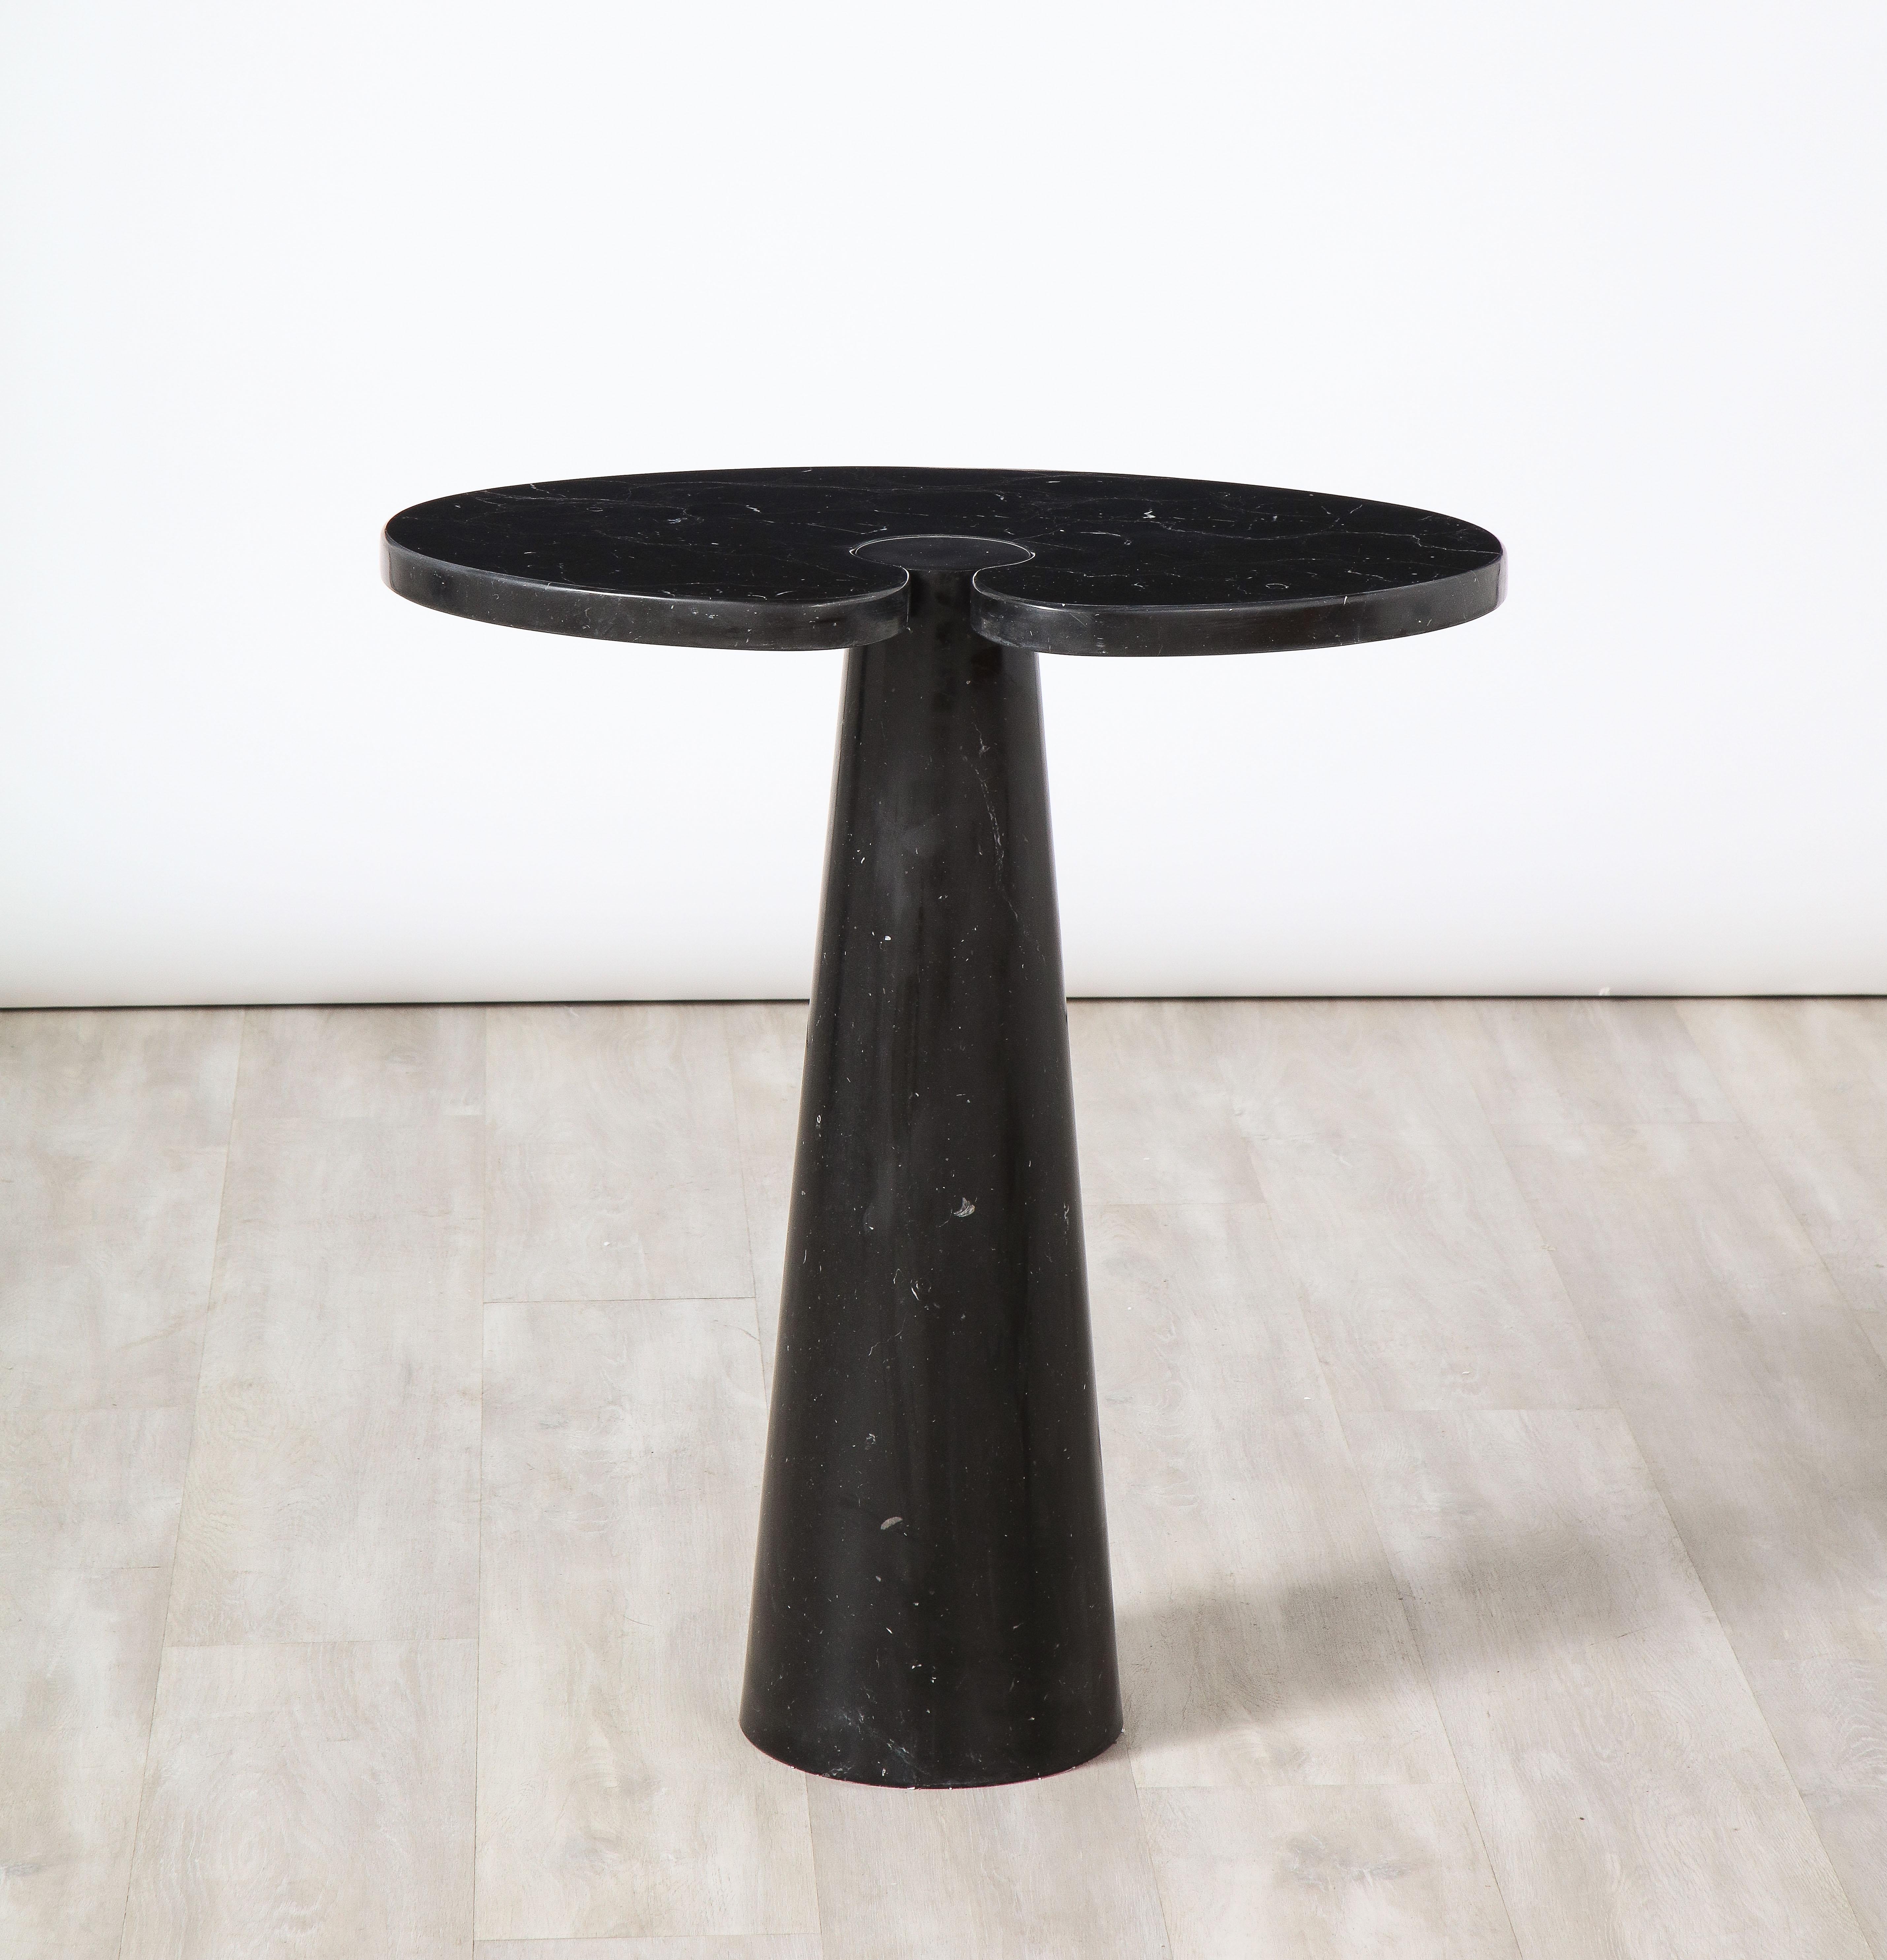 Angelo Mangiarotti for Skipper 'Eros' Series Nero marquina tall marble side table, 1971. Designed by Angelo Mangiarotti for Skipper, the 'Eros' series, this iconic Nero Marquina tall side table is supported on one conical leg base, with beautiful